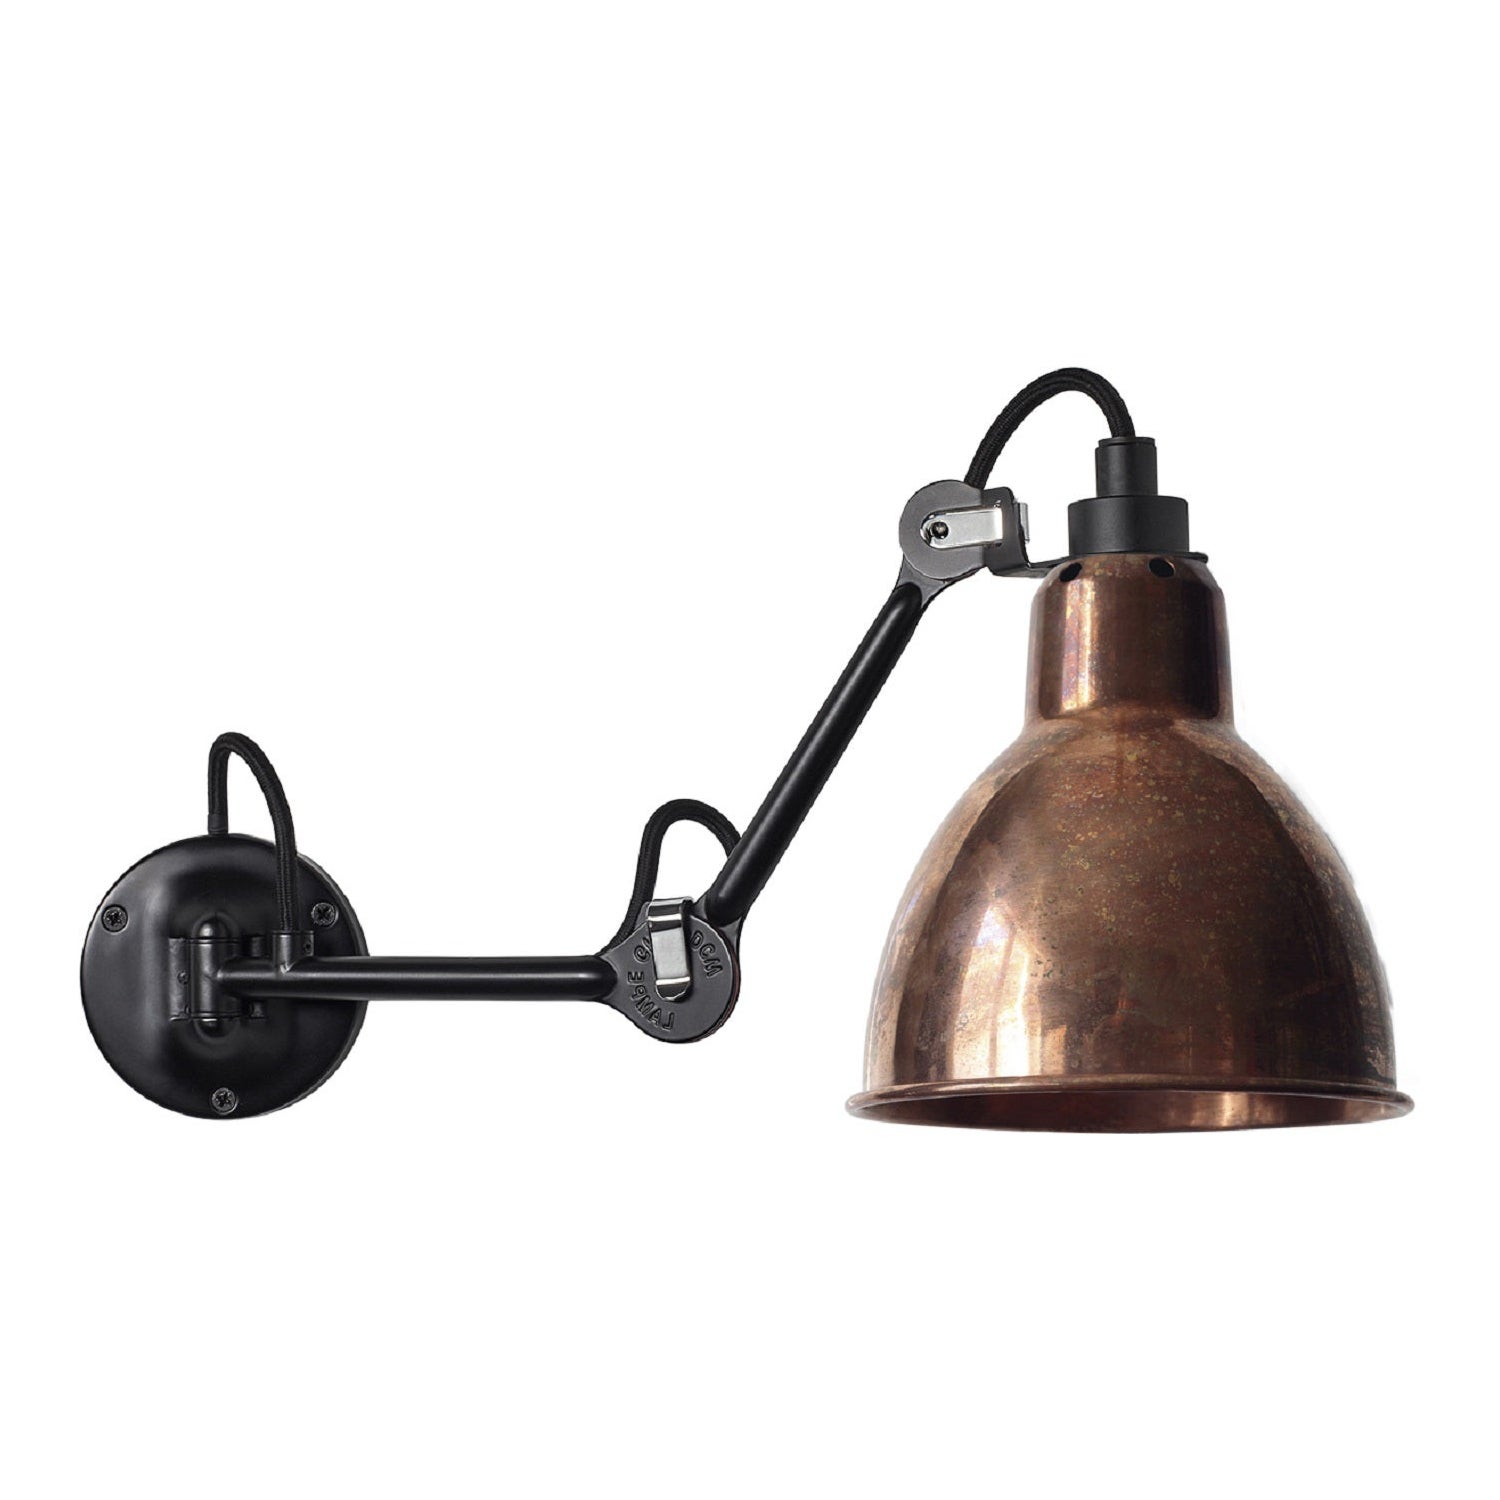 DCW Editions La Lampe Gras N°204 Wall Lamp in Black Arm and Raw Copper Shade For Sale